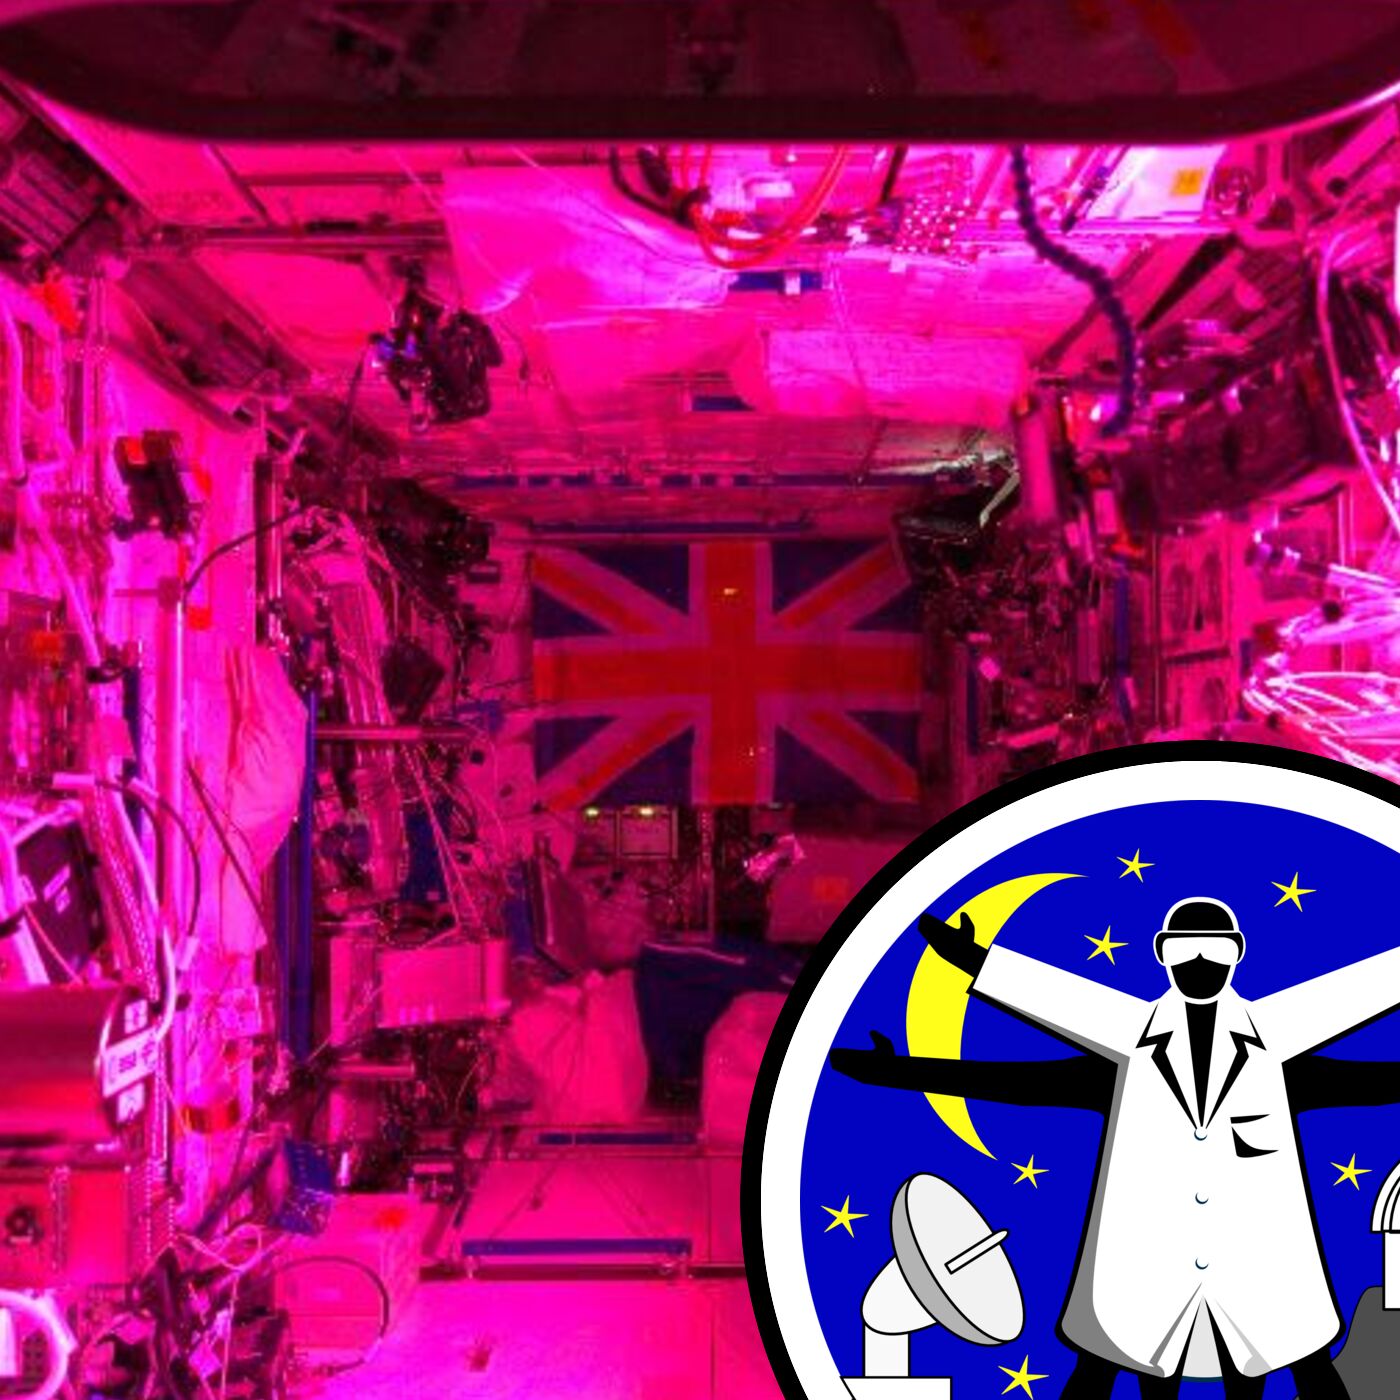 Brits in Space!